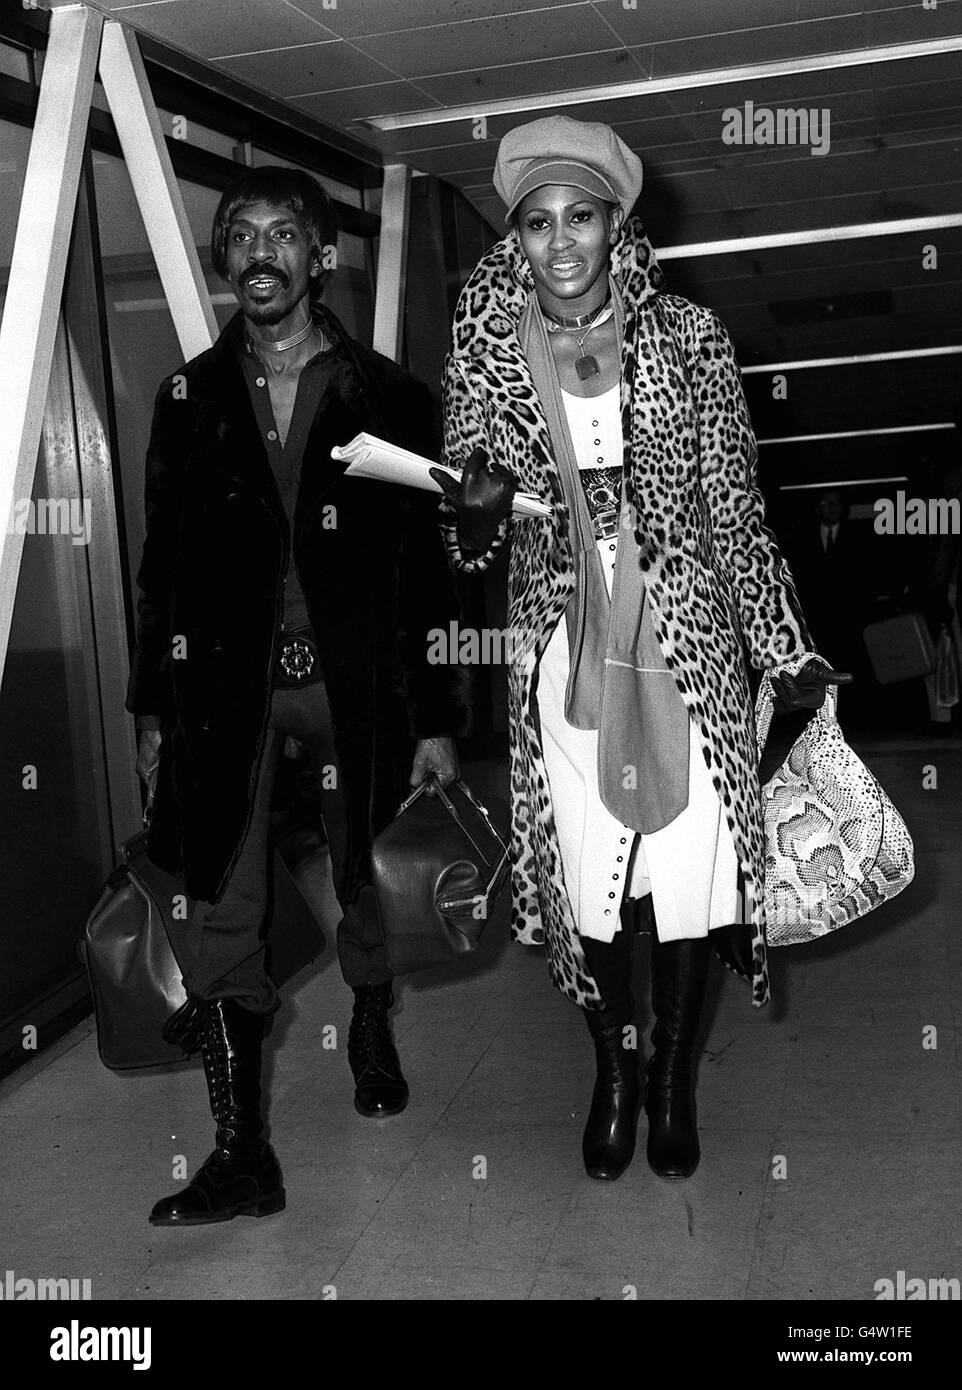 PA NEWS PHOTO 12/2/71 TINA TURNER, WEARING A LEOPARD SKIN COAT, AND REPTILE ACCESSORIES ARRIVES WITH HUSBAND AND SINGING PARTNER IKE TURNER. Stock Photo